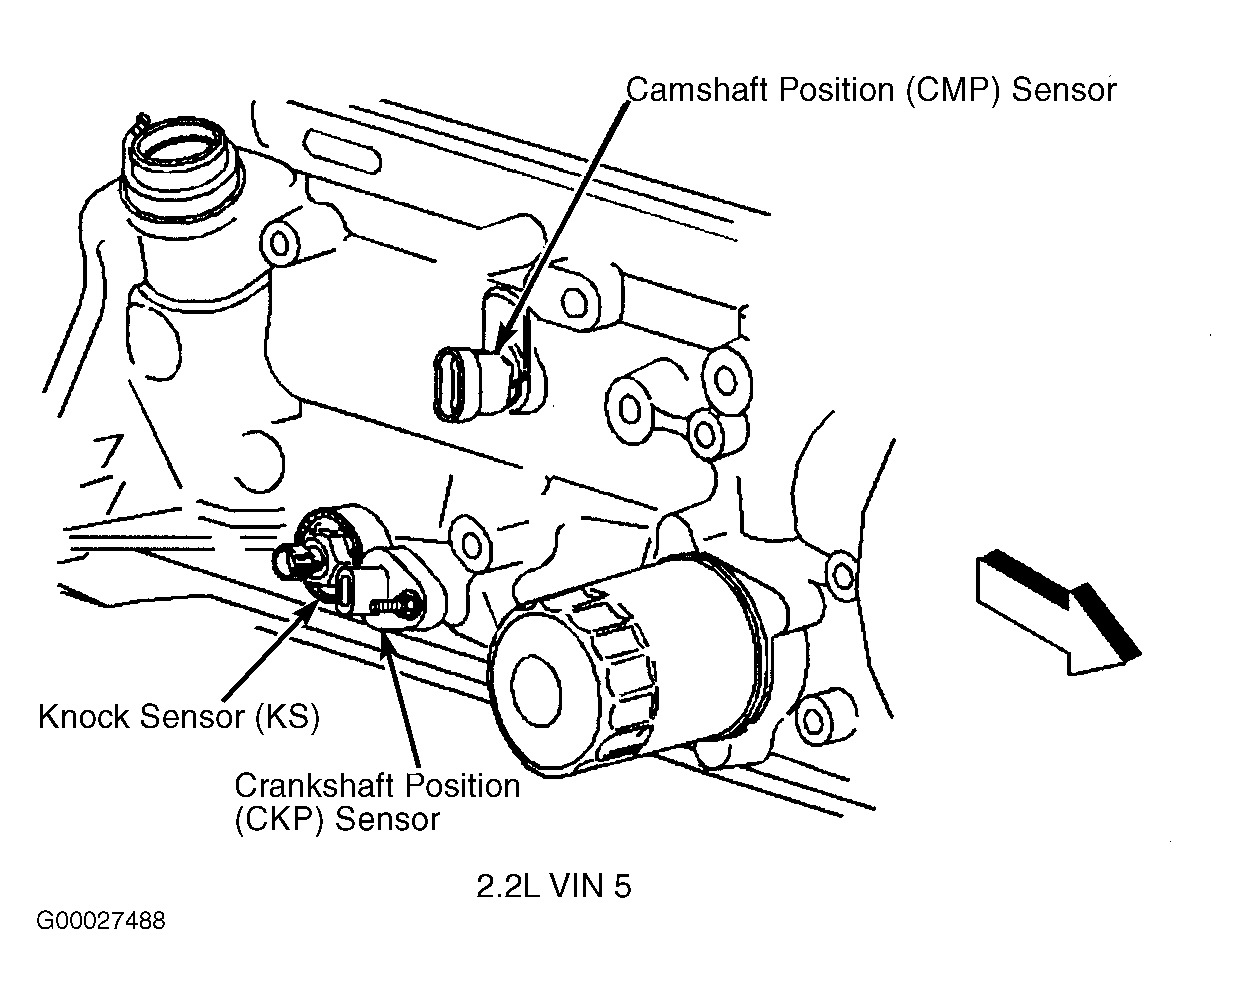 Chevrolet Blazer 2003 - Component Locations -  Right Side Of Engine (2.2L VIN 5)